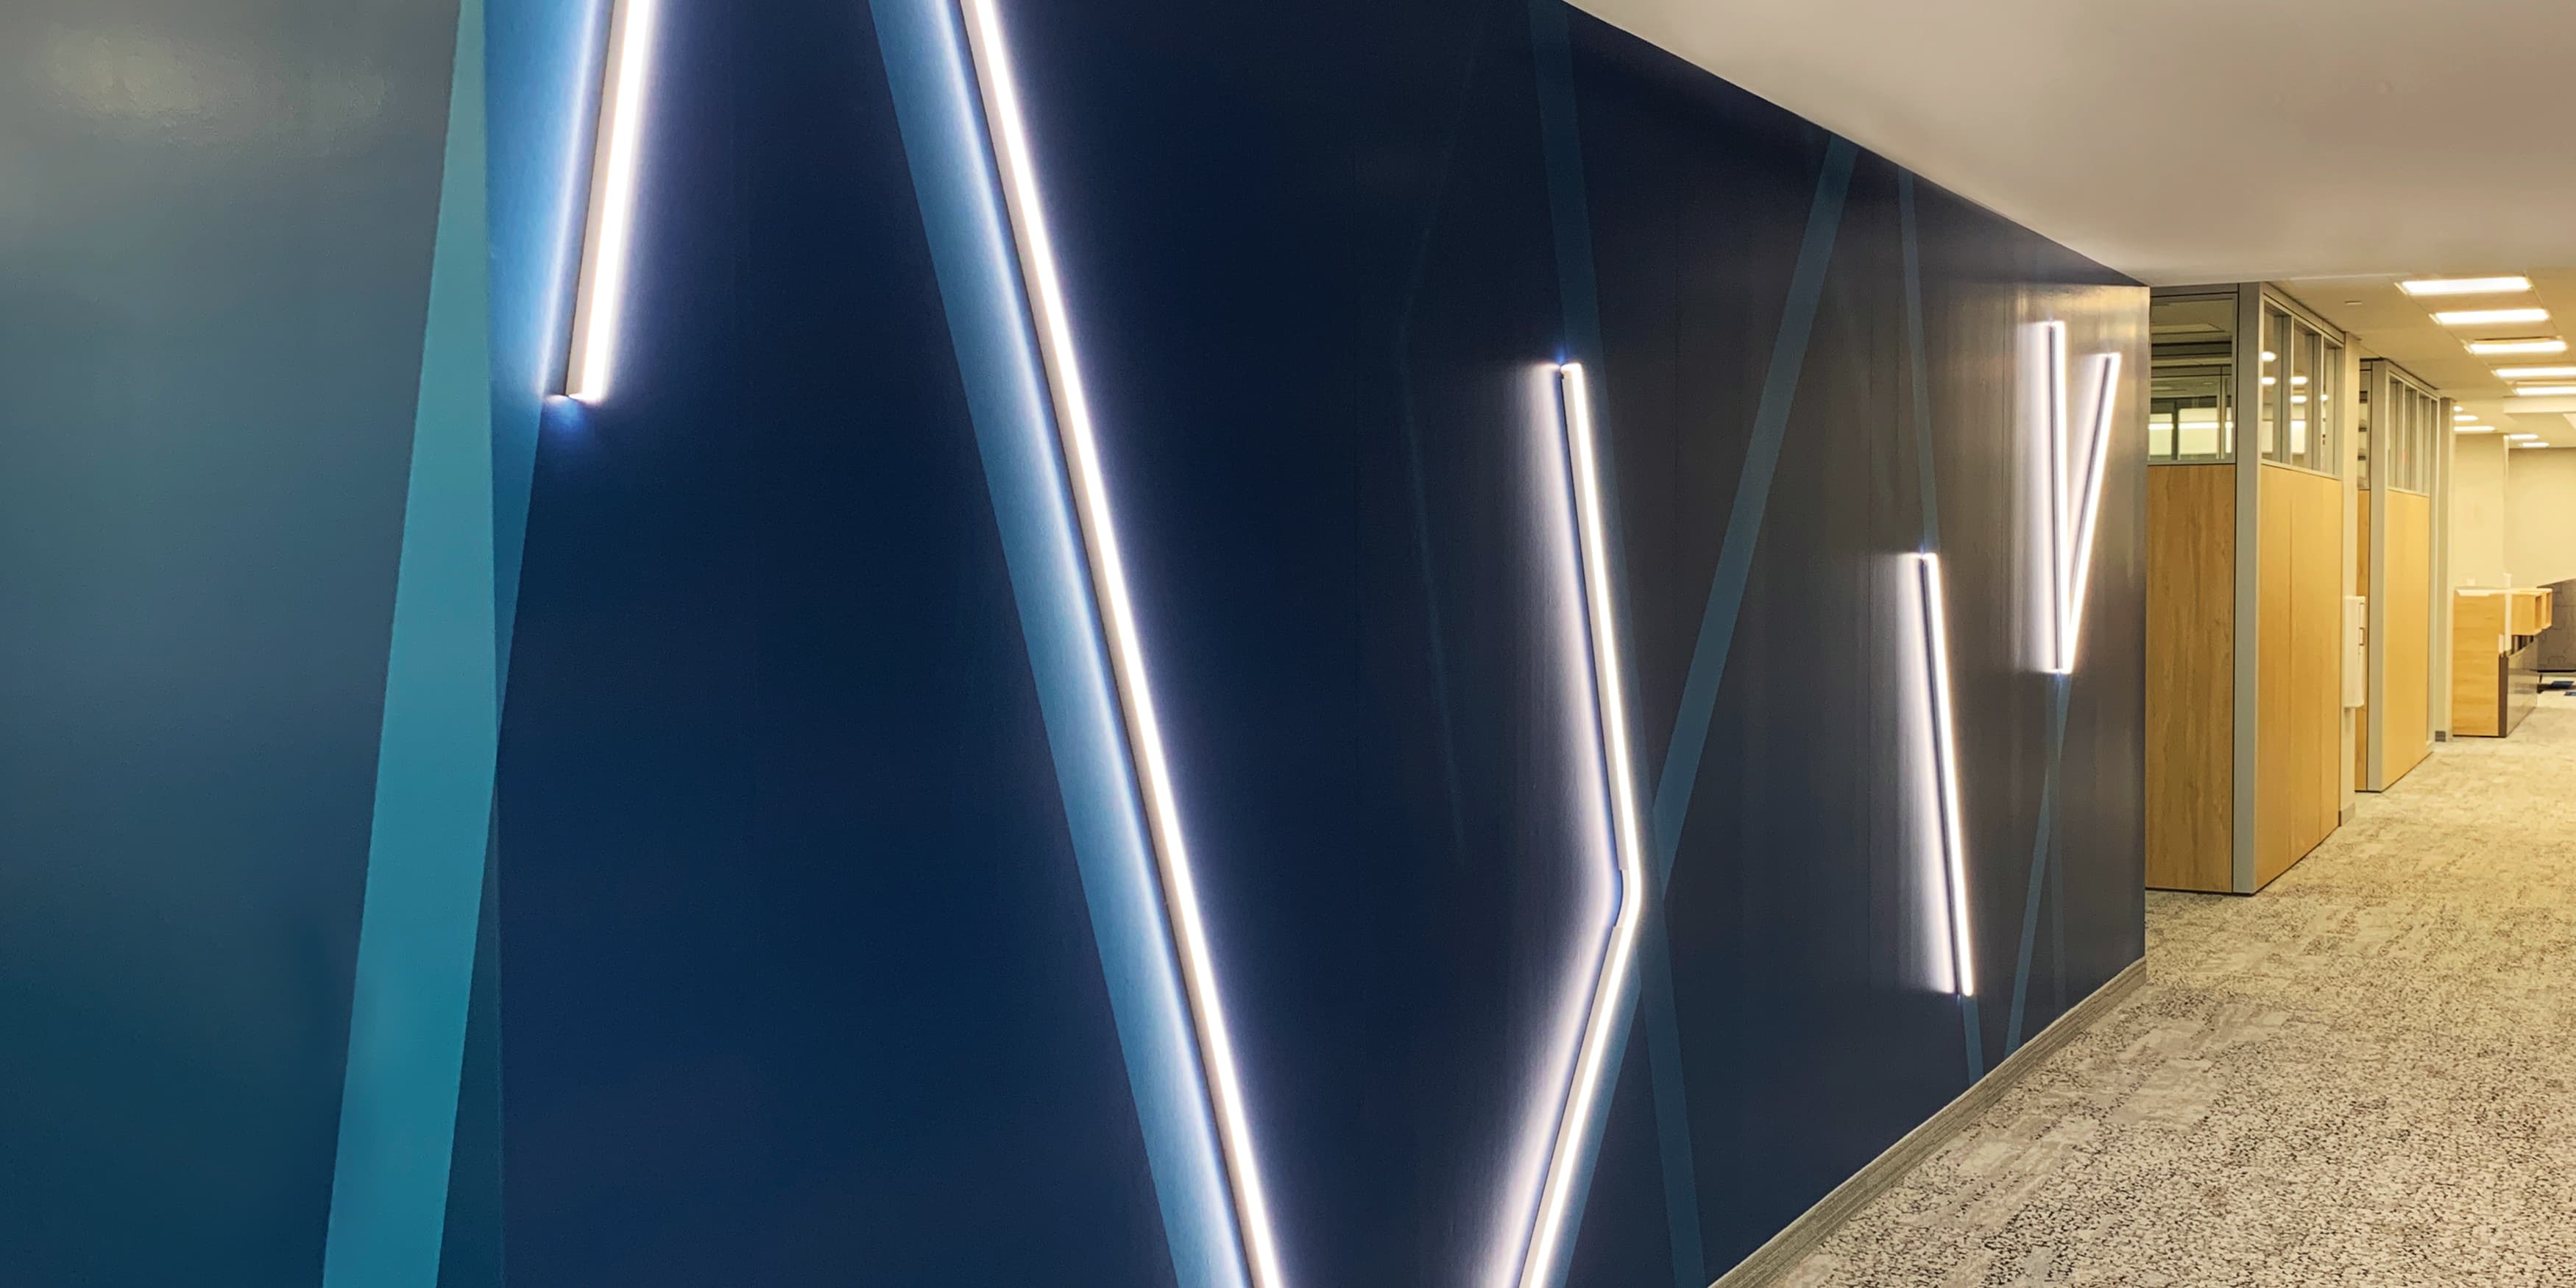 Speciality art mural by RSM Design for JMFE Headquarters consisting of blue bent neon signage for office workplace design.k